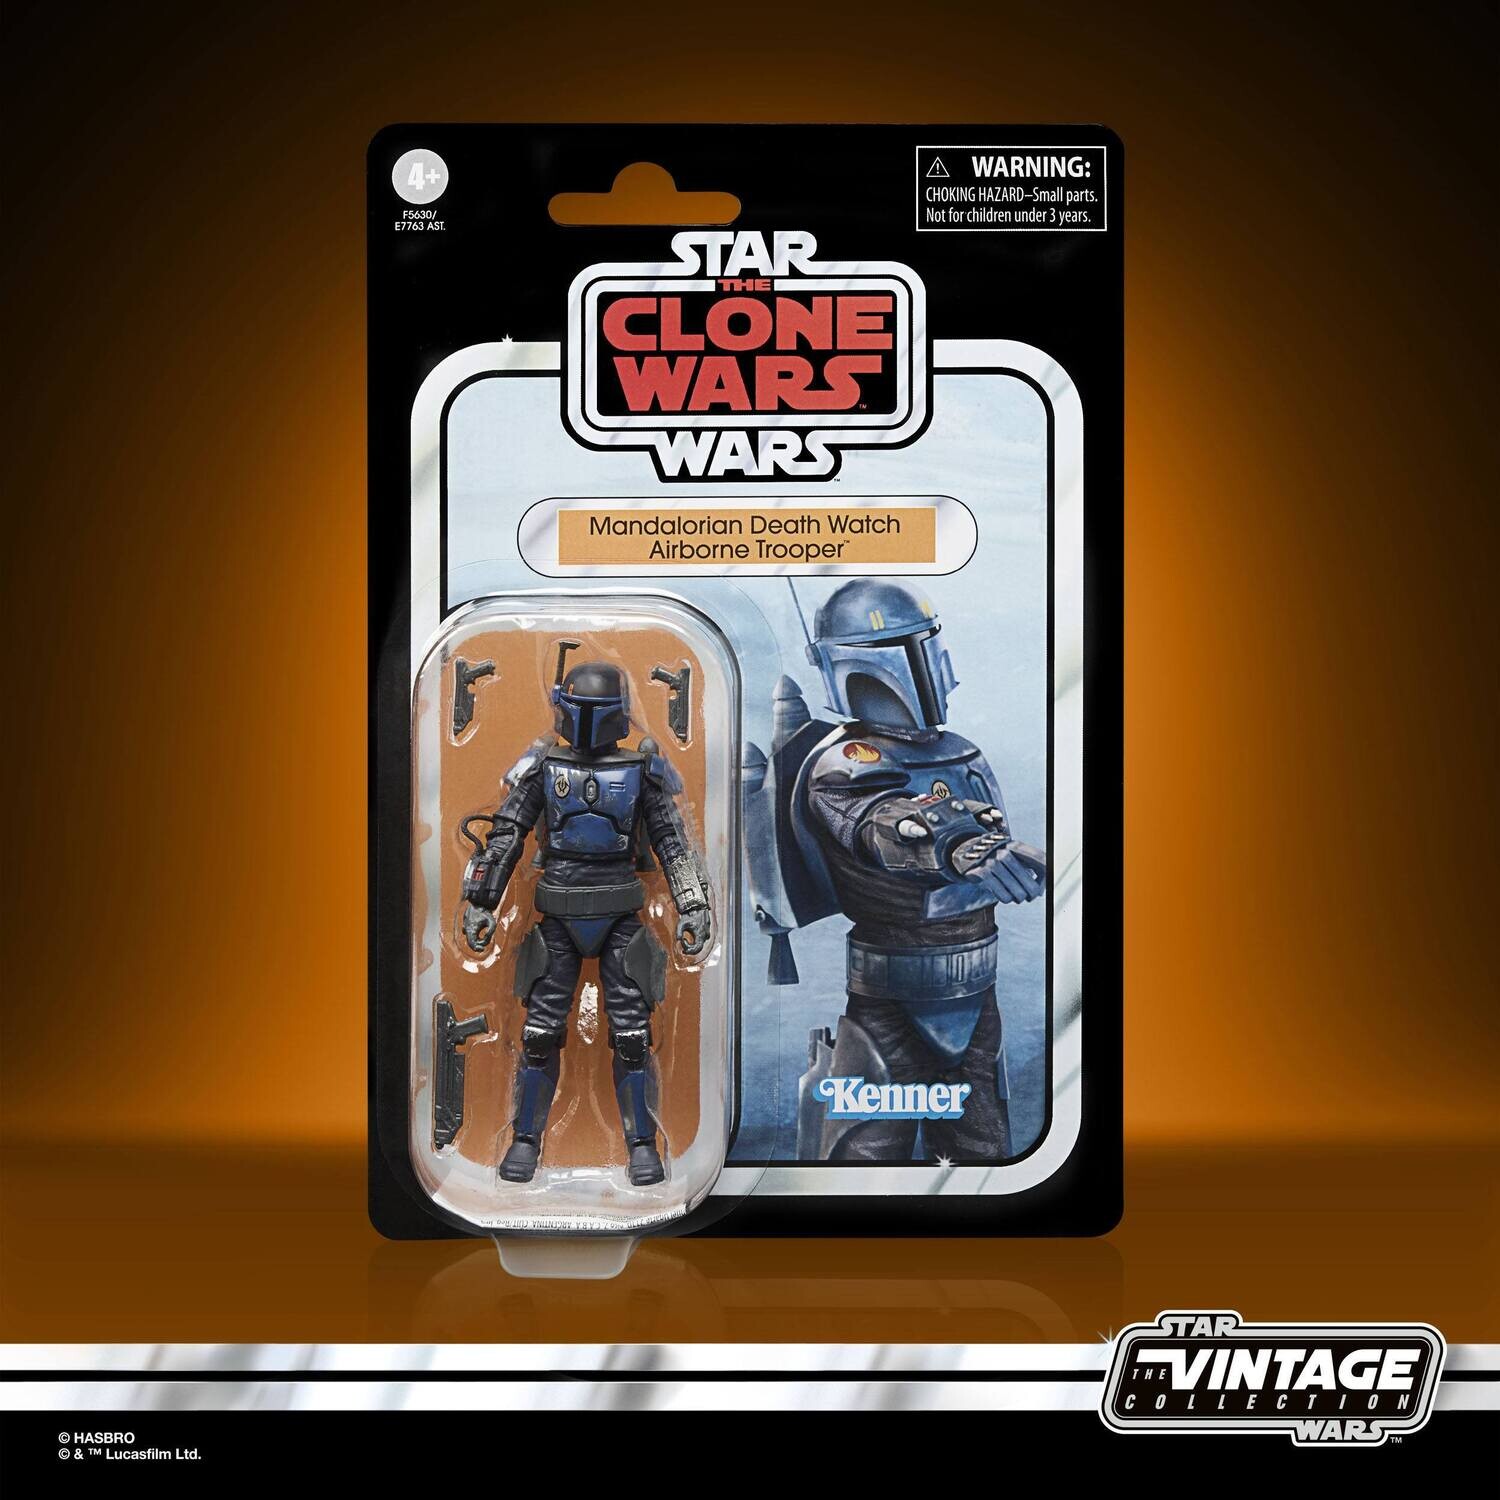 Pre-order: Star Wars The Vintage Collection Mandalorian Death Watch Airborne Trooper set of 8 sealed factory case (134.9.9)